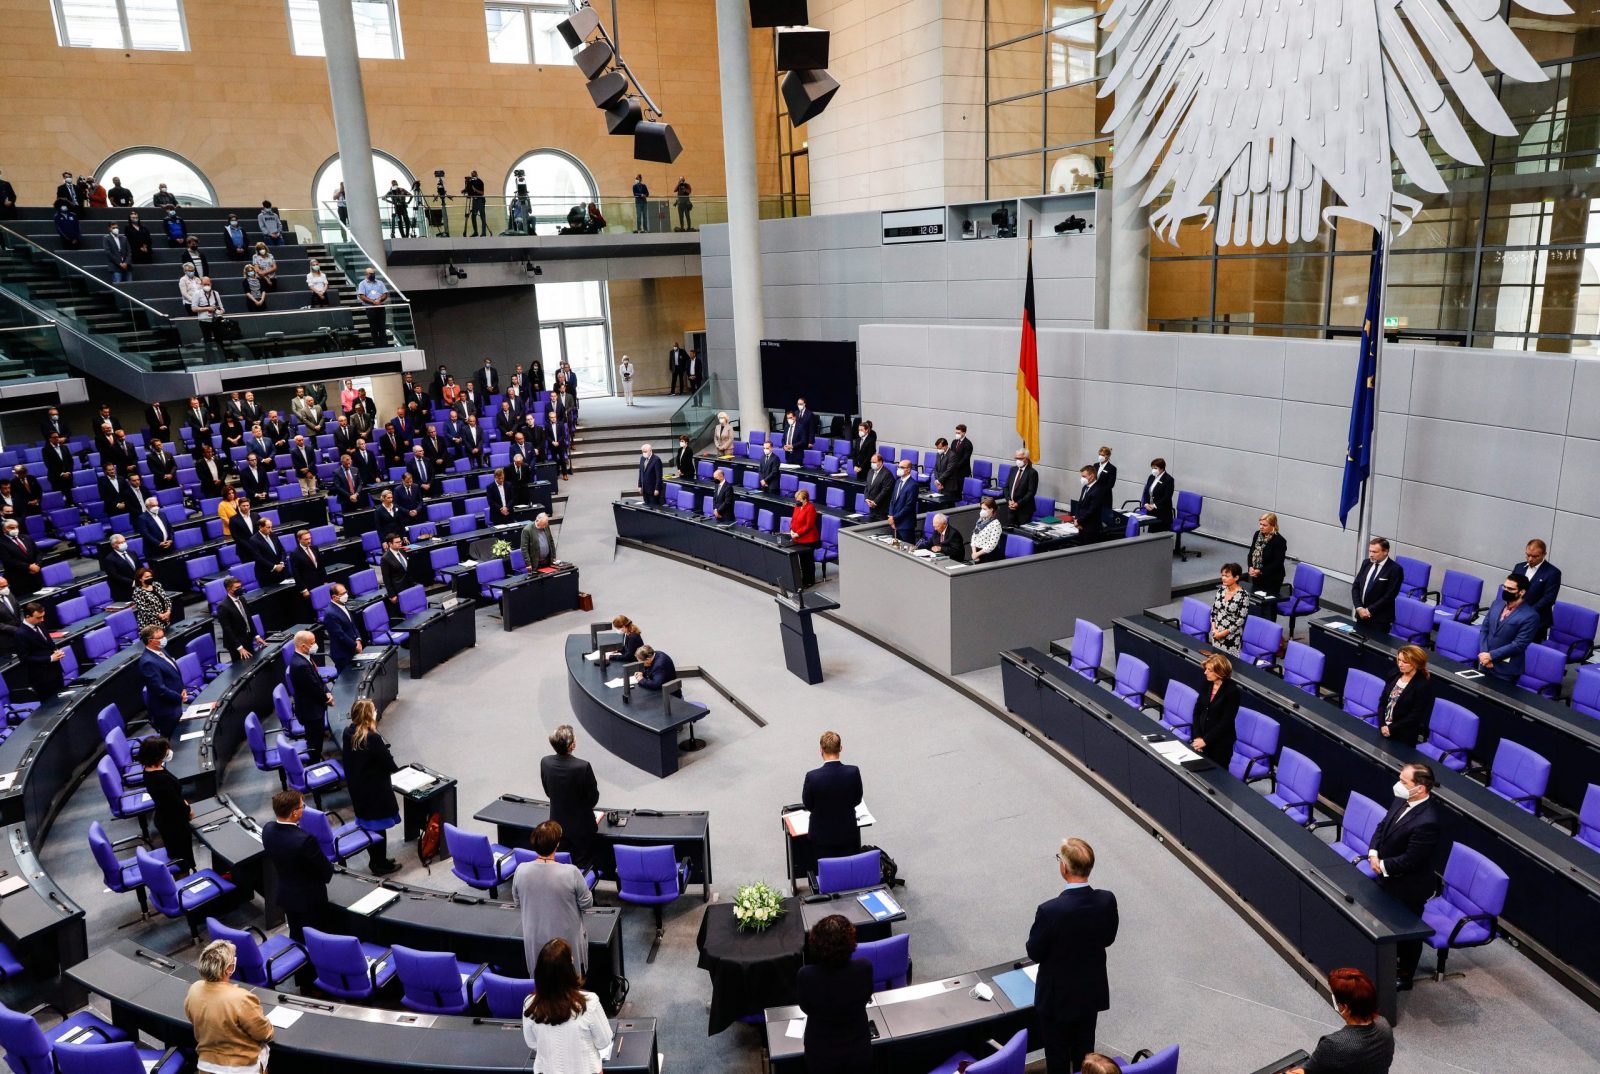 epa09428762 General view of a session of the German parliament Bundestag in Berlin, Germany, 25 August 2021. The German parliament consults the situation in Afghanistan and Germany's devastating floods.  EPA/FILIP SINGER